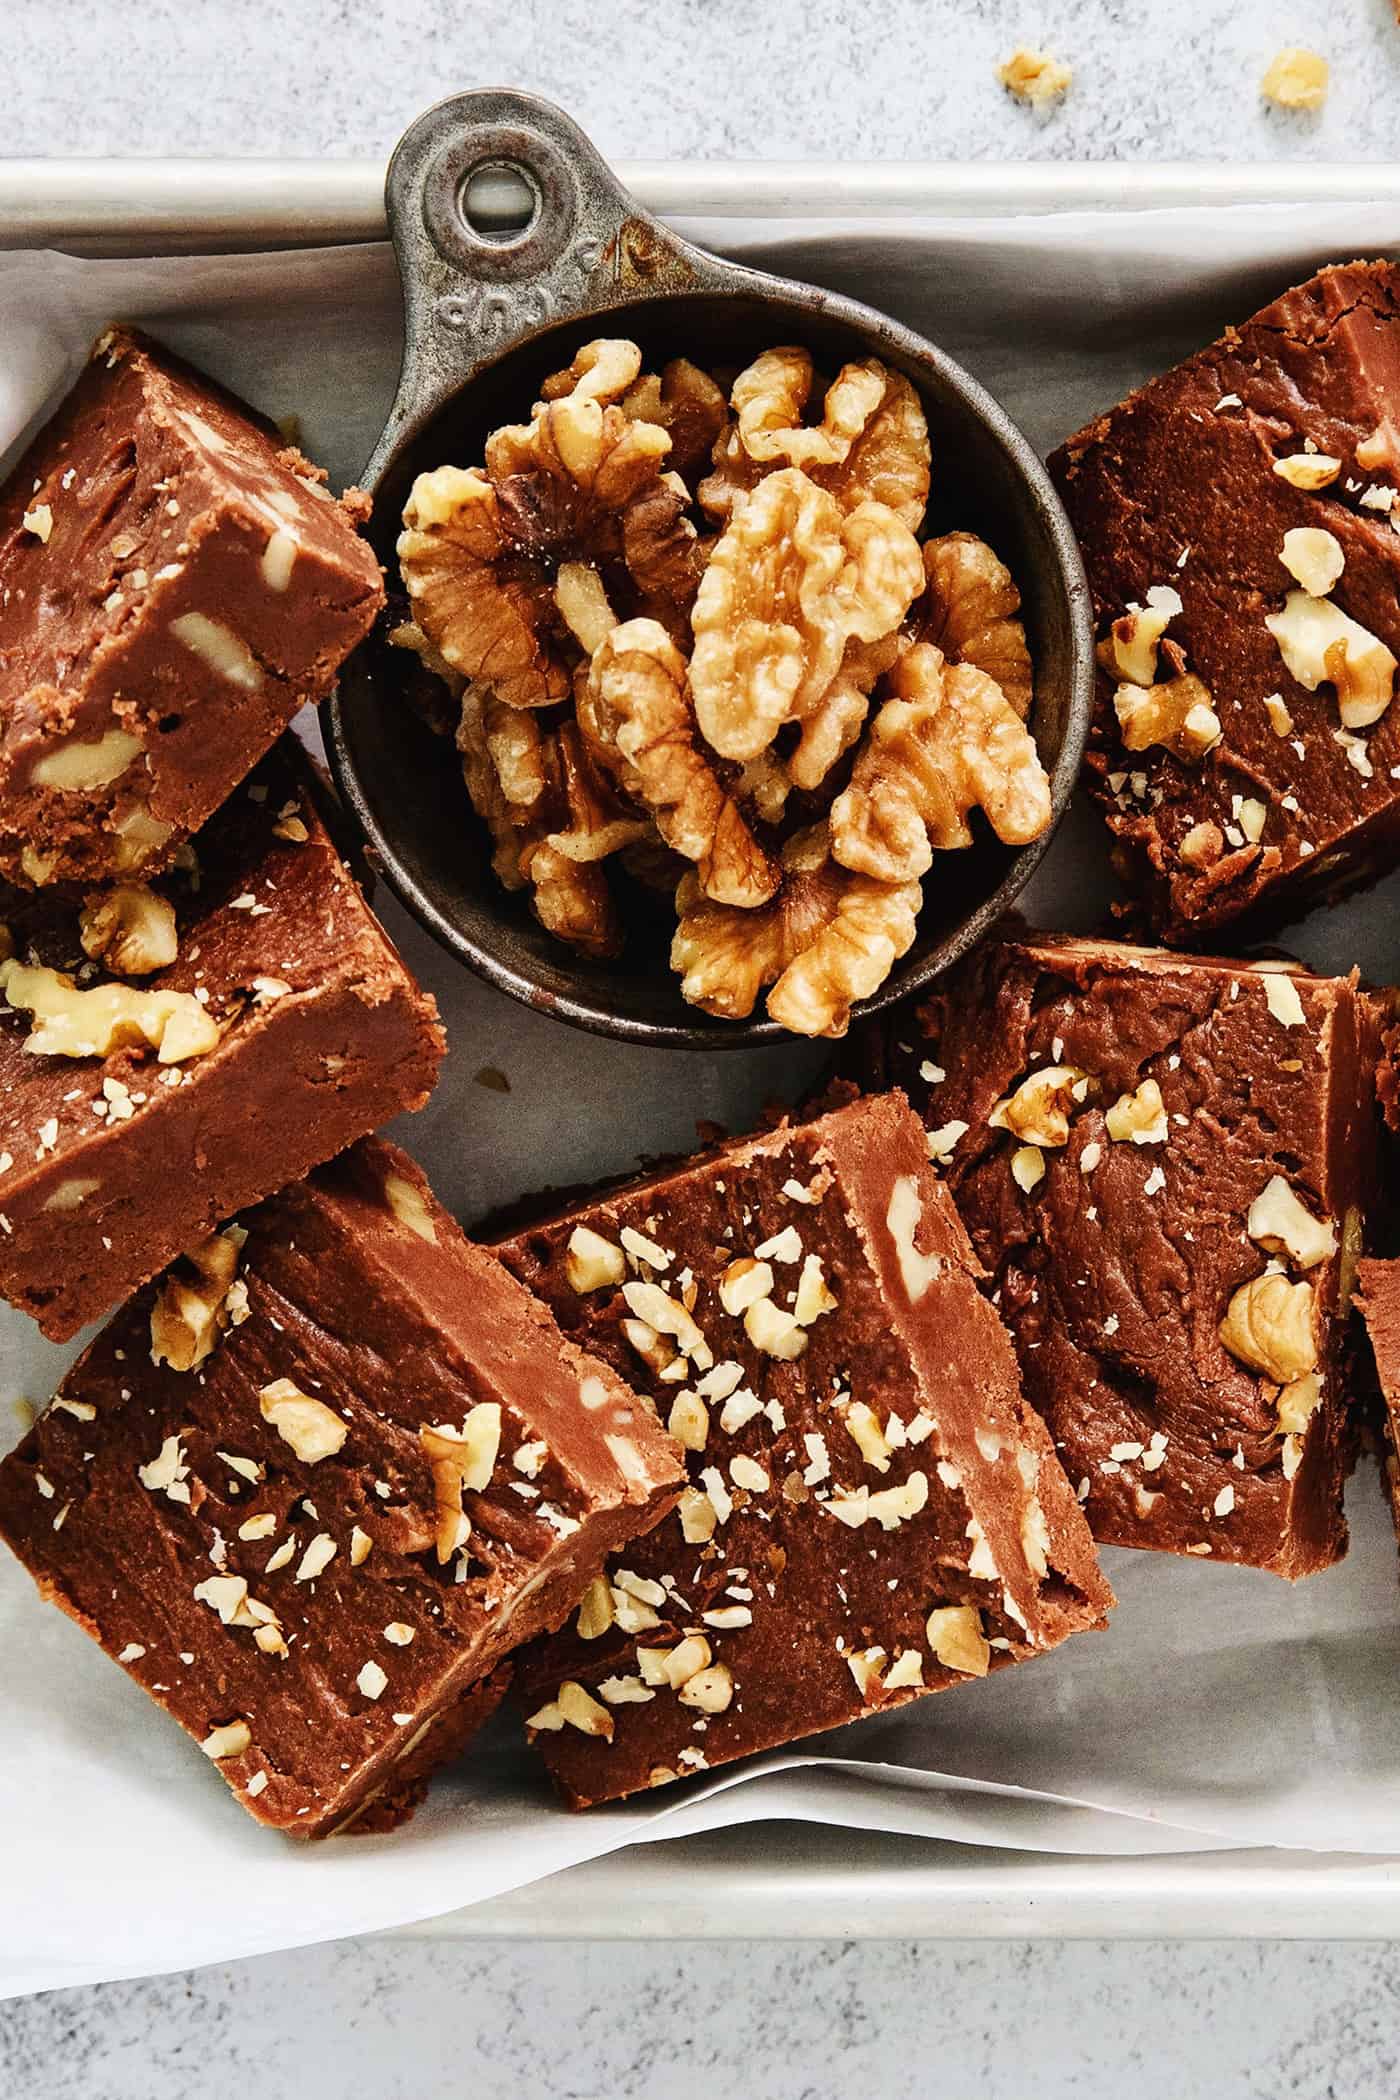 A tray of Fantasy Fudge is shown with walnuts above it.